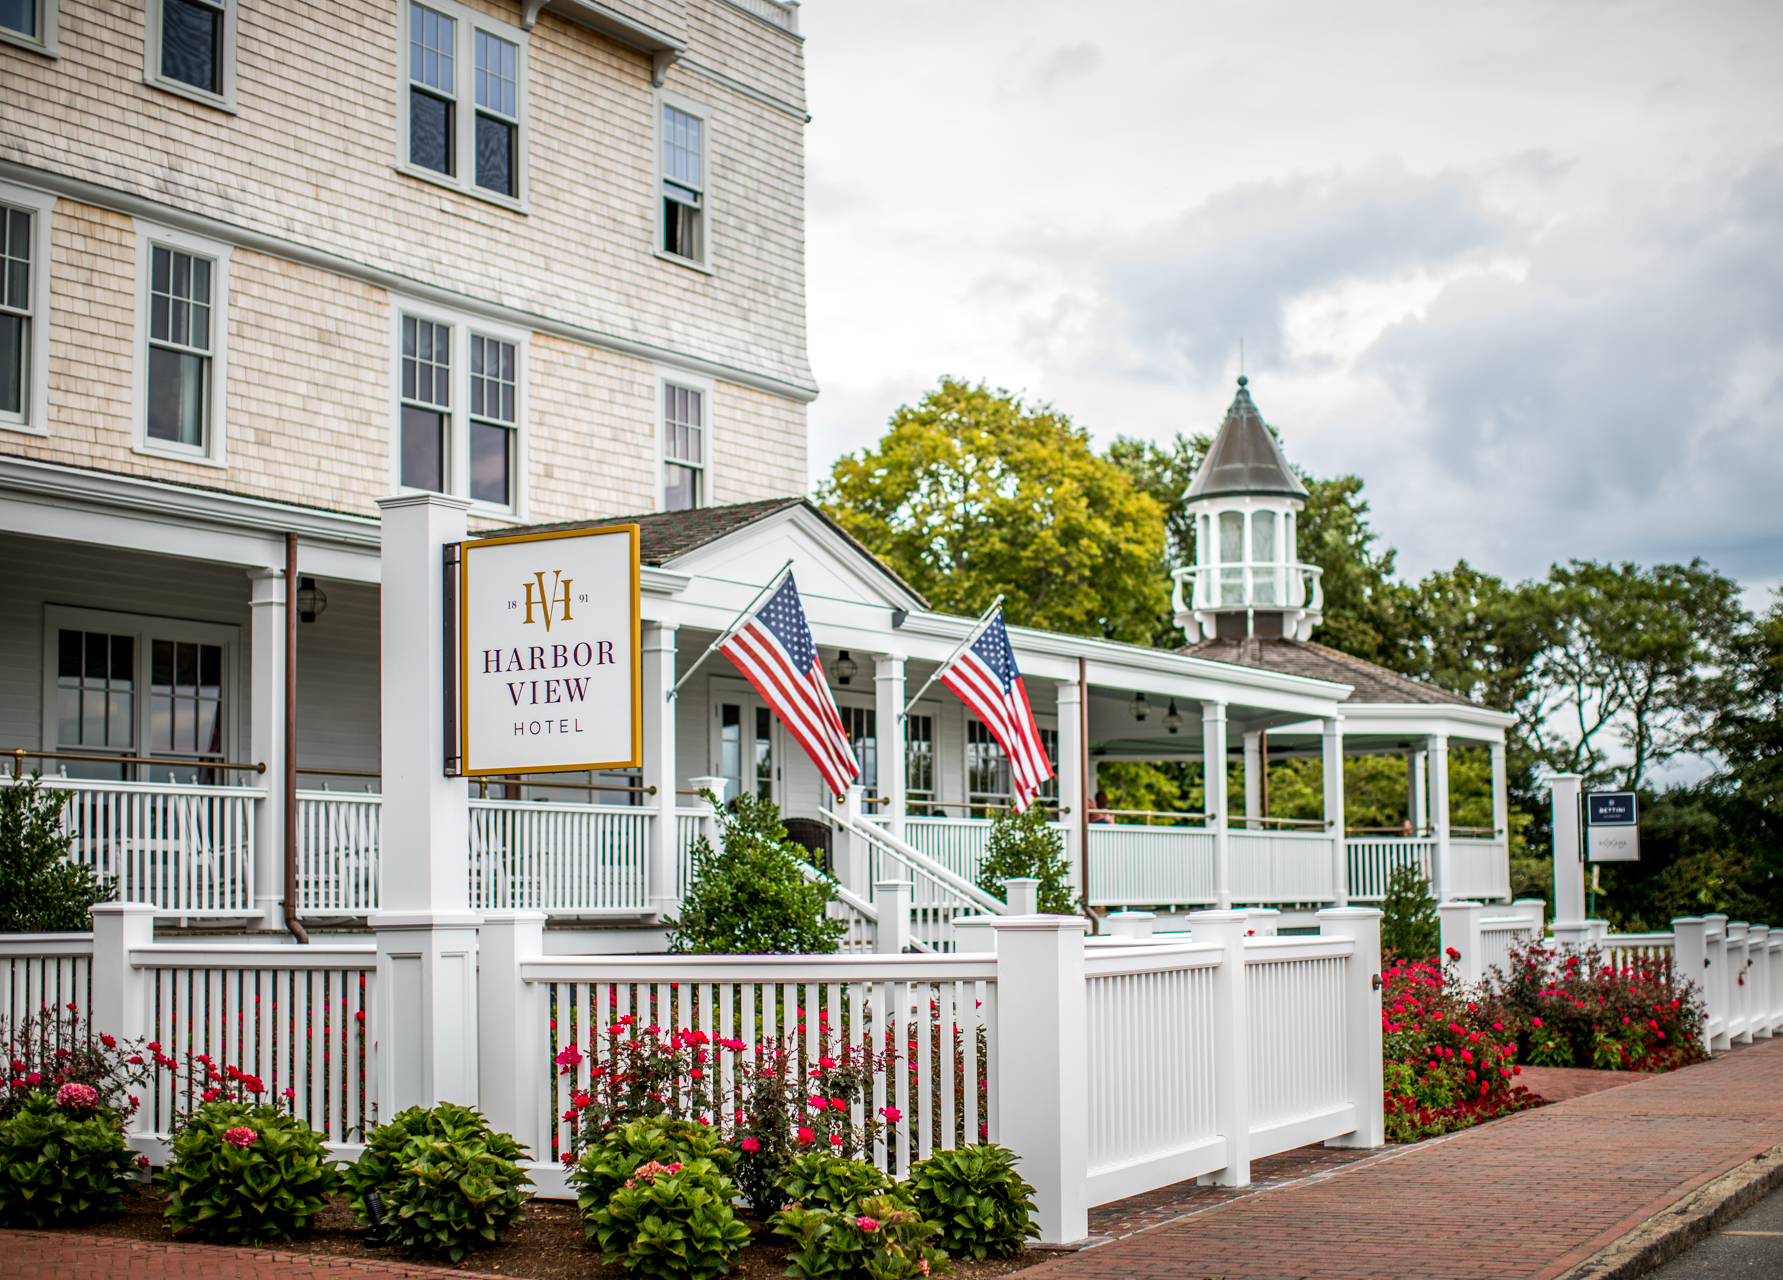 The Harbor View Hotel: Where to Stay in Martha's Vineyard MA